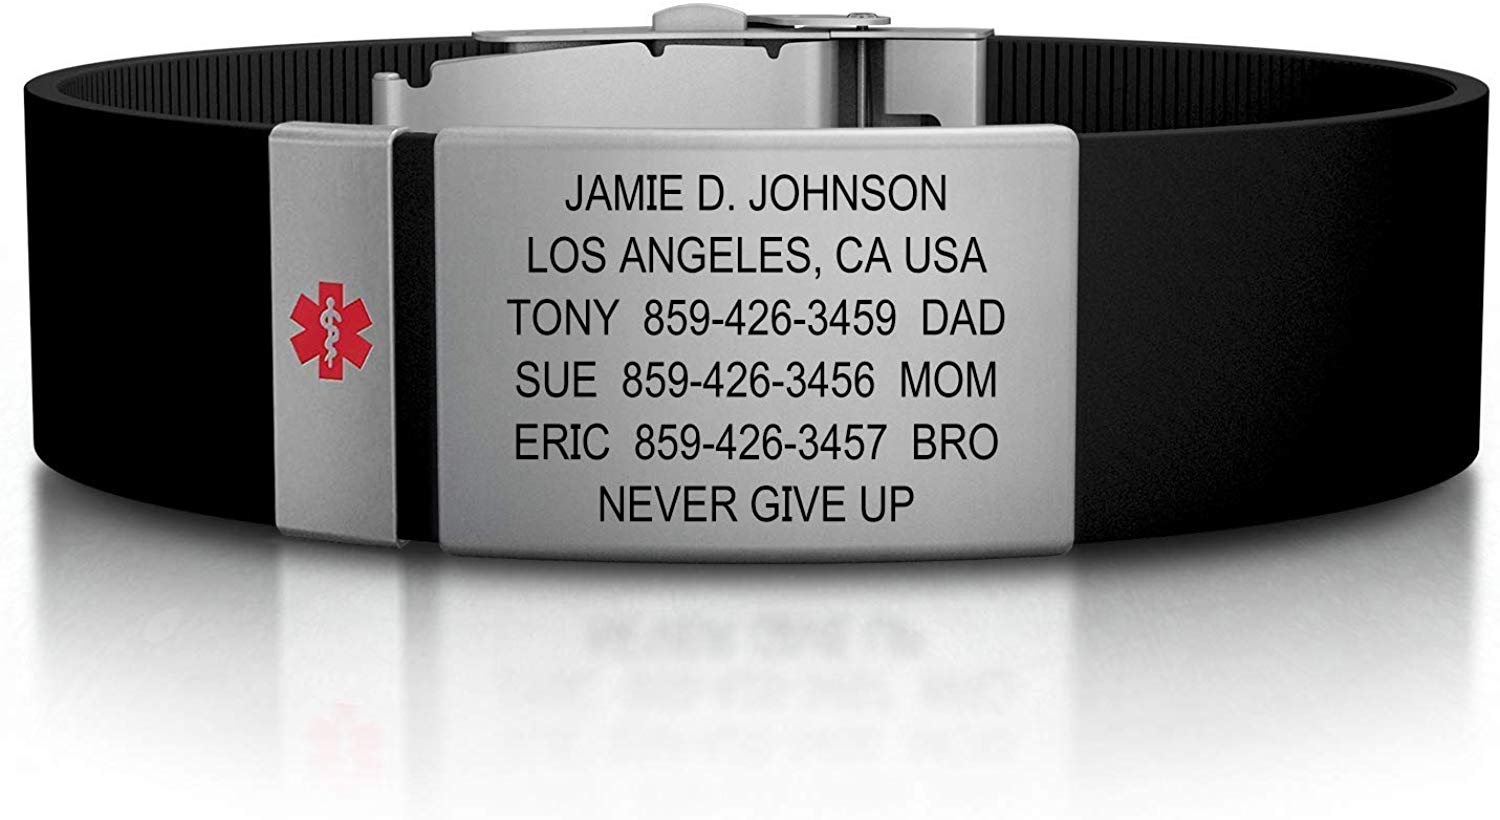 Review of Road ID Medical Alert Bracelet - Official ID Wristband with Medical Alert Badge - Silicone Clasp